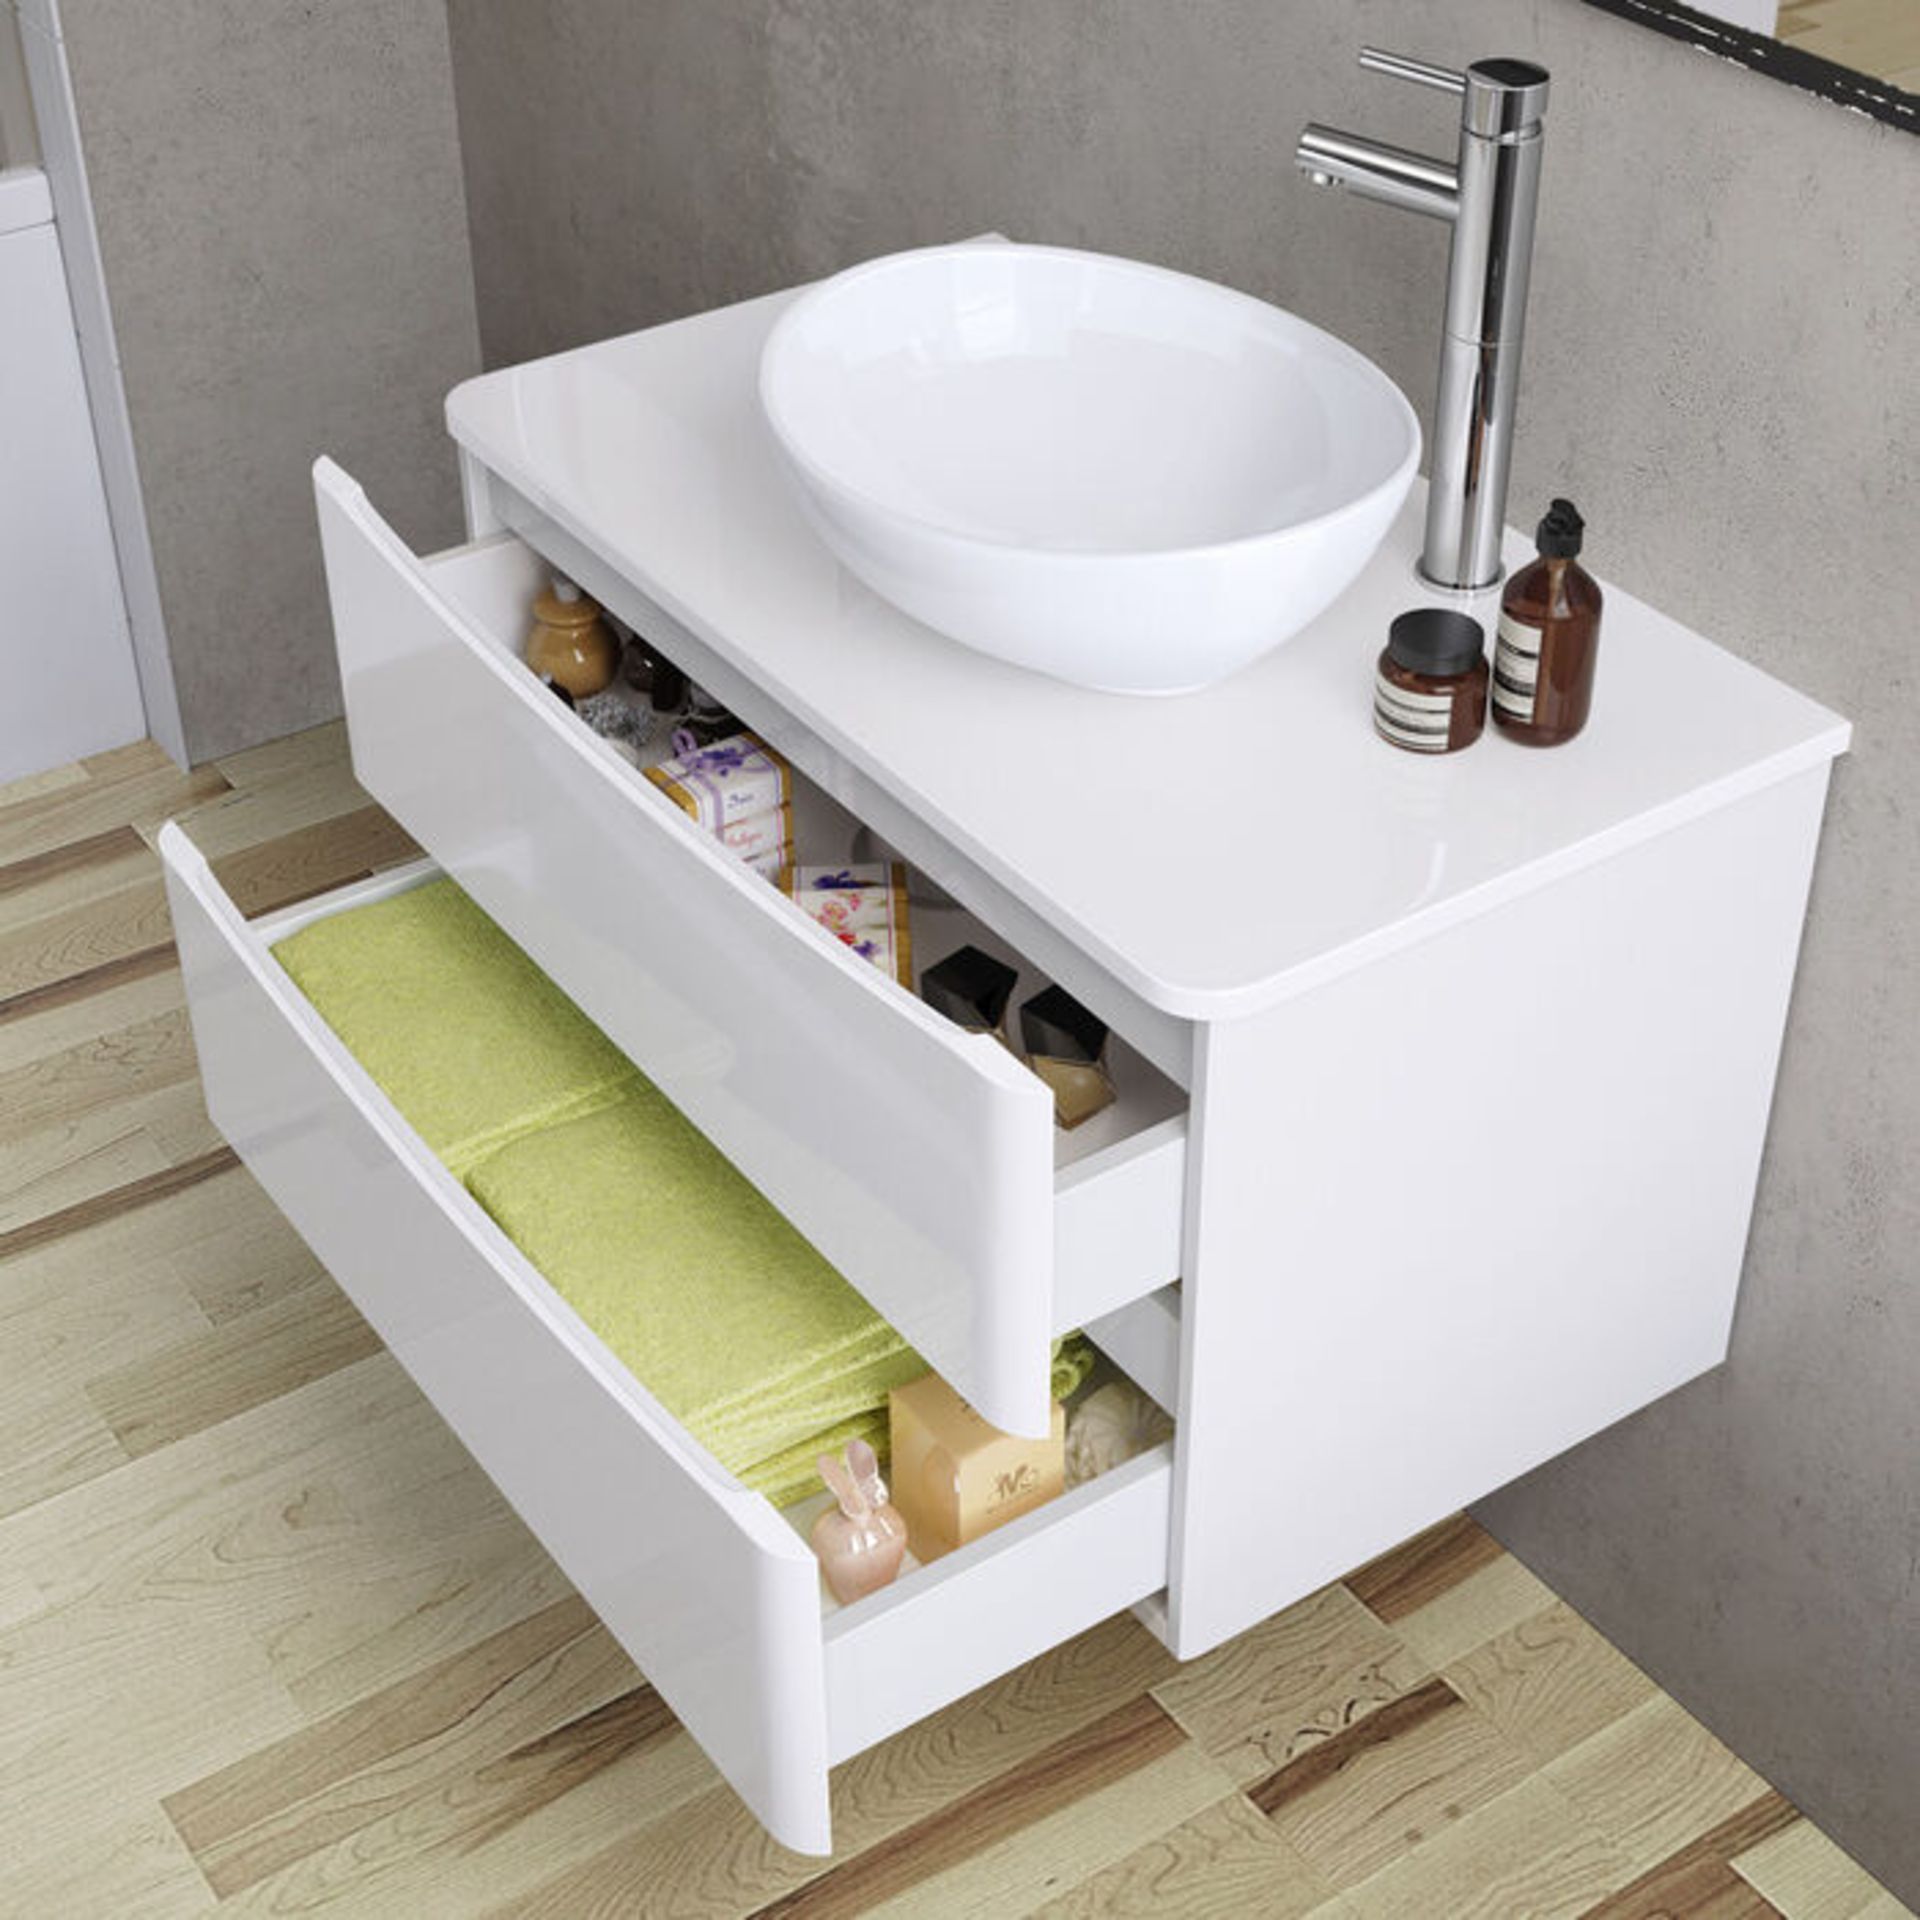 NEW & BOXED 1000mm Austin II Gloss White Countertop Unit and Camila Basin - Wall Hung. RRP £89... - Image 3 of 3